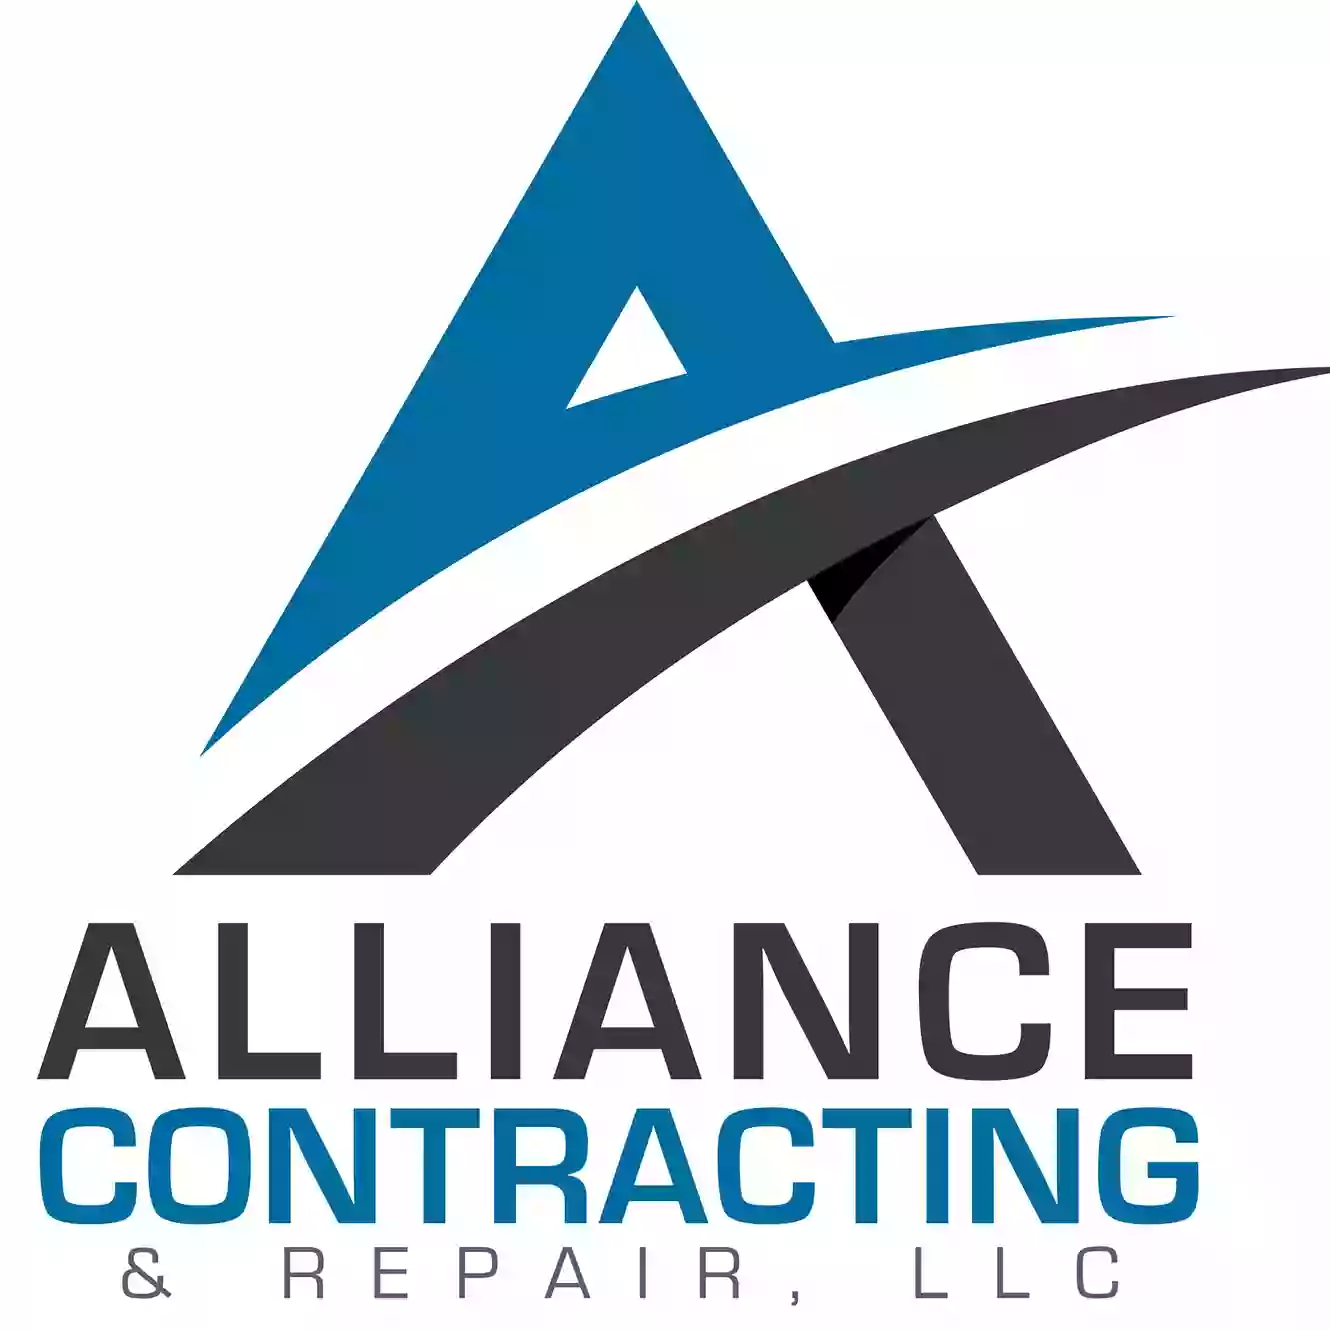 Alliance Contracting and Repair, LLC